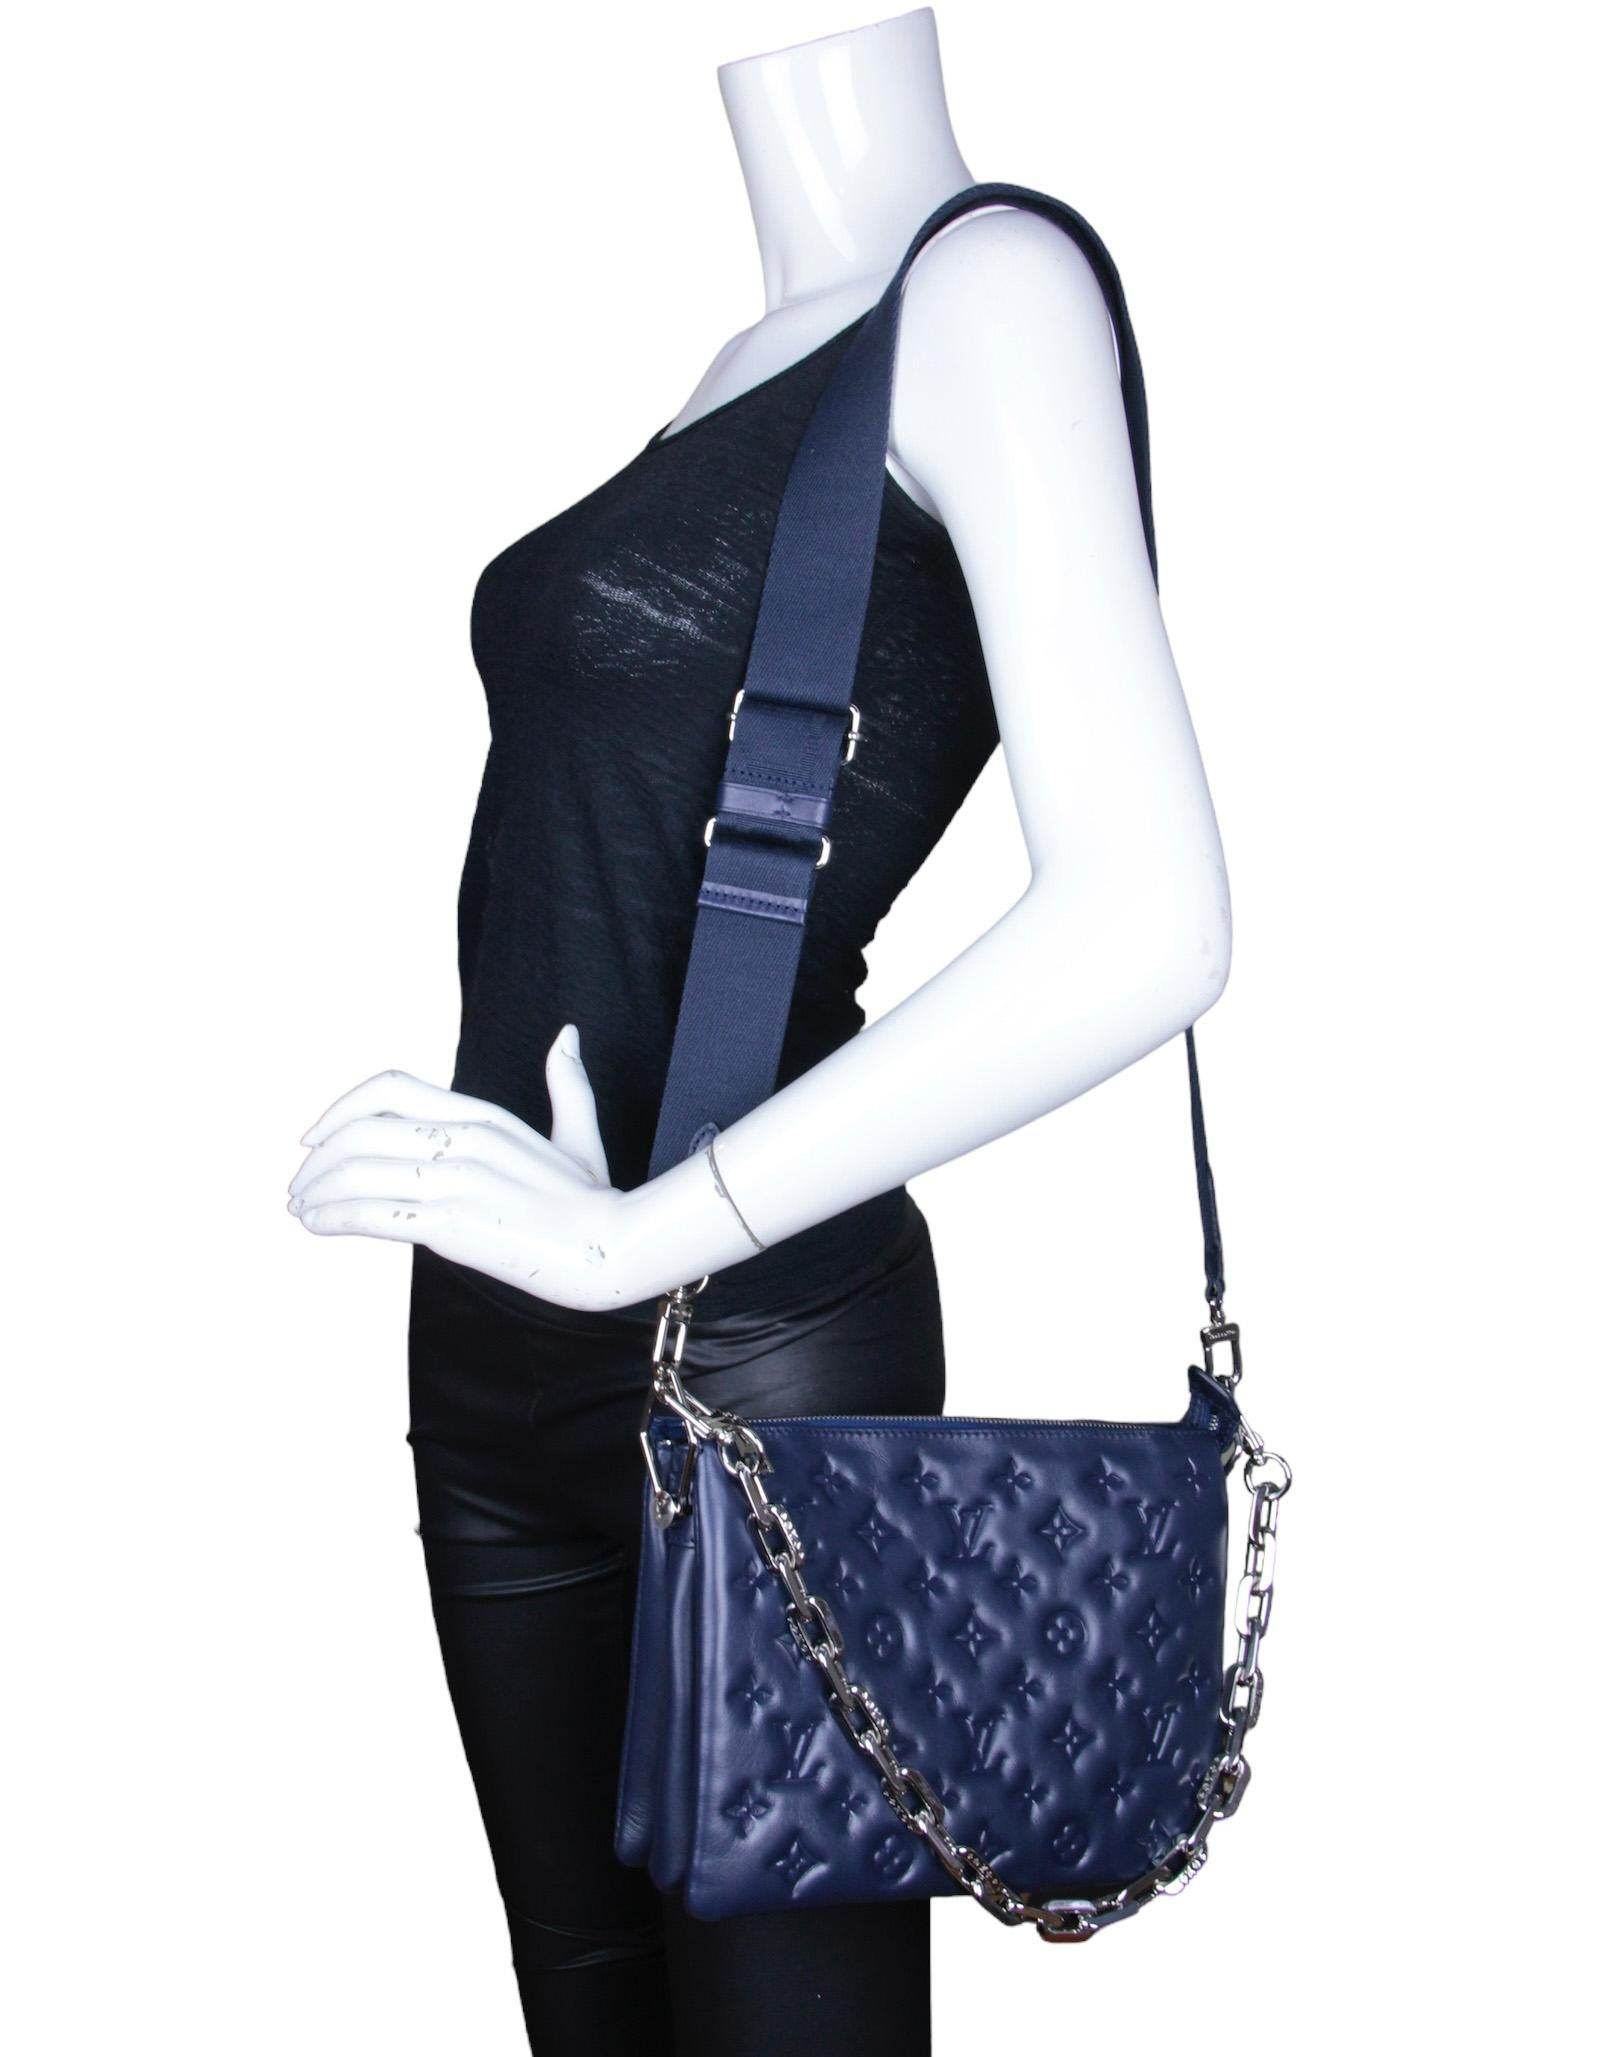 Louis Vuitton Navy Lambskin Leather Embossed Monogram Coussin PM Bag.  Features adjustable canvas strap allowing for crossbody or shoulder carry, and chain strap for baguette and under-arm carry.
Made In: France
Year of Production: 2022
Color: